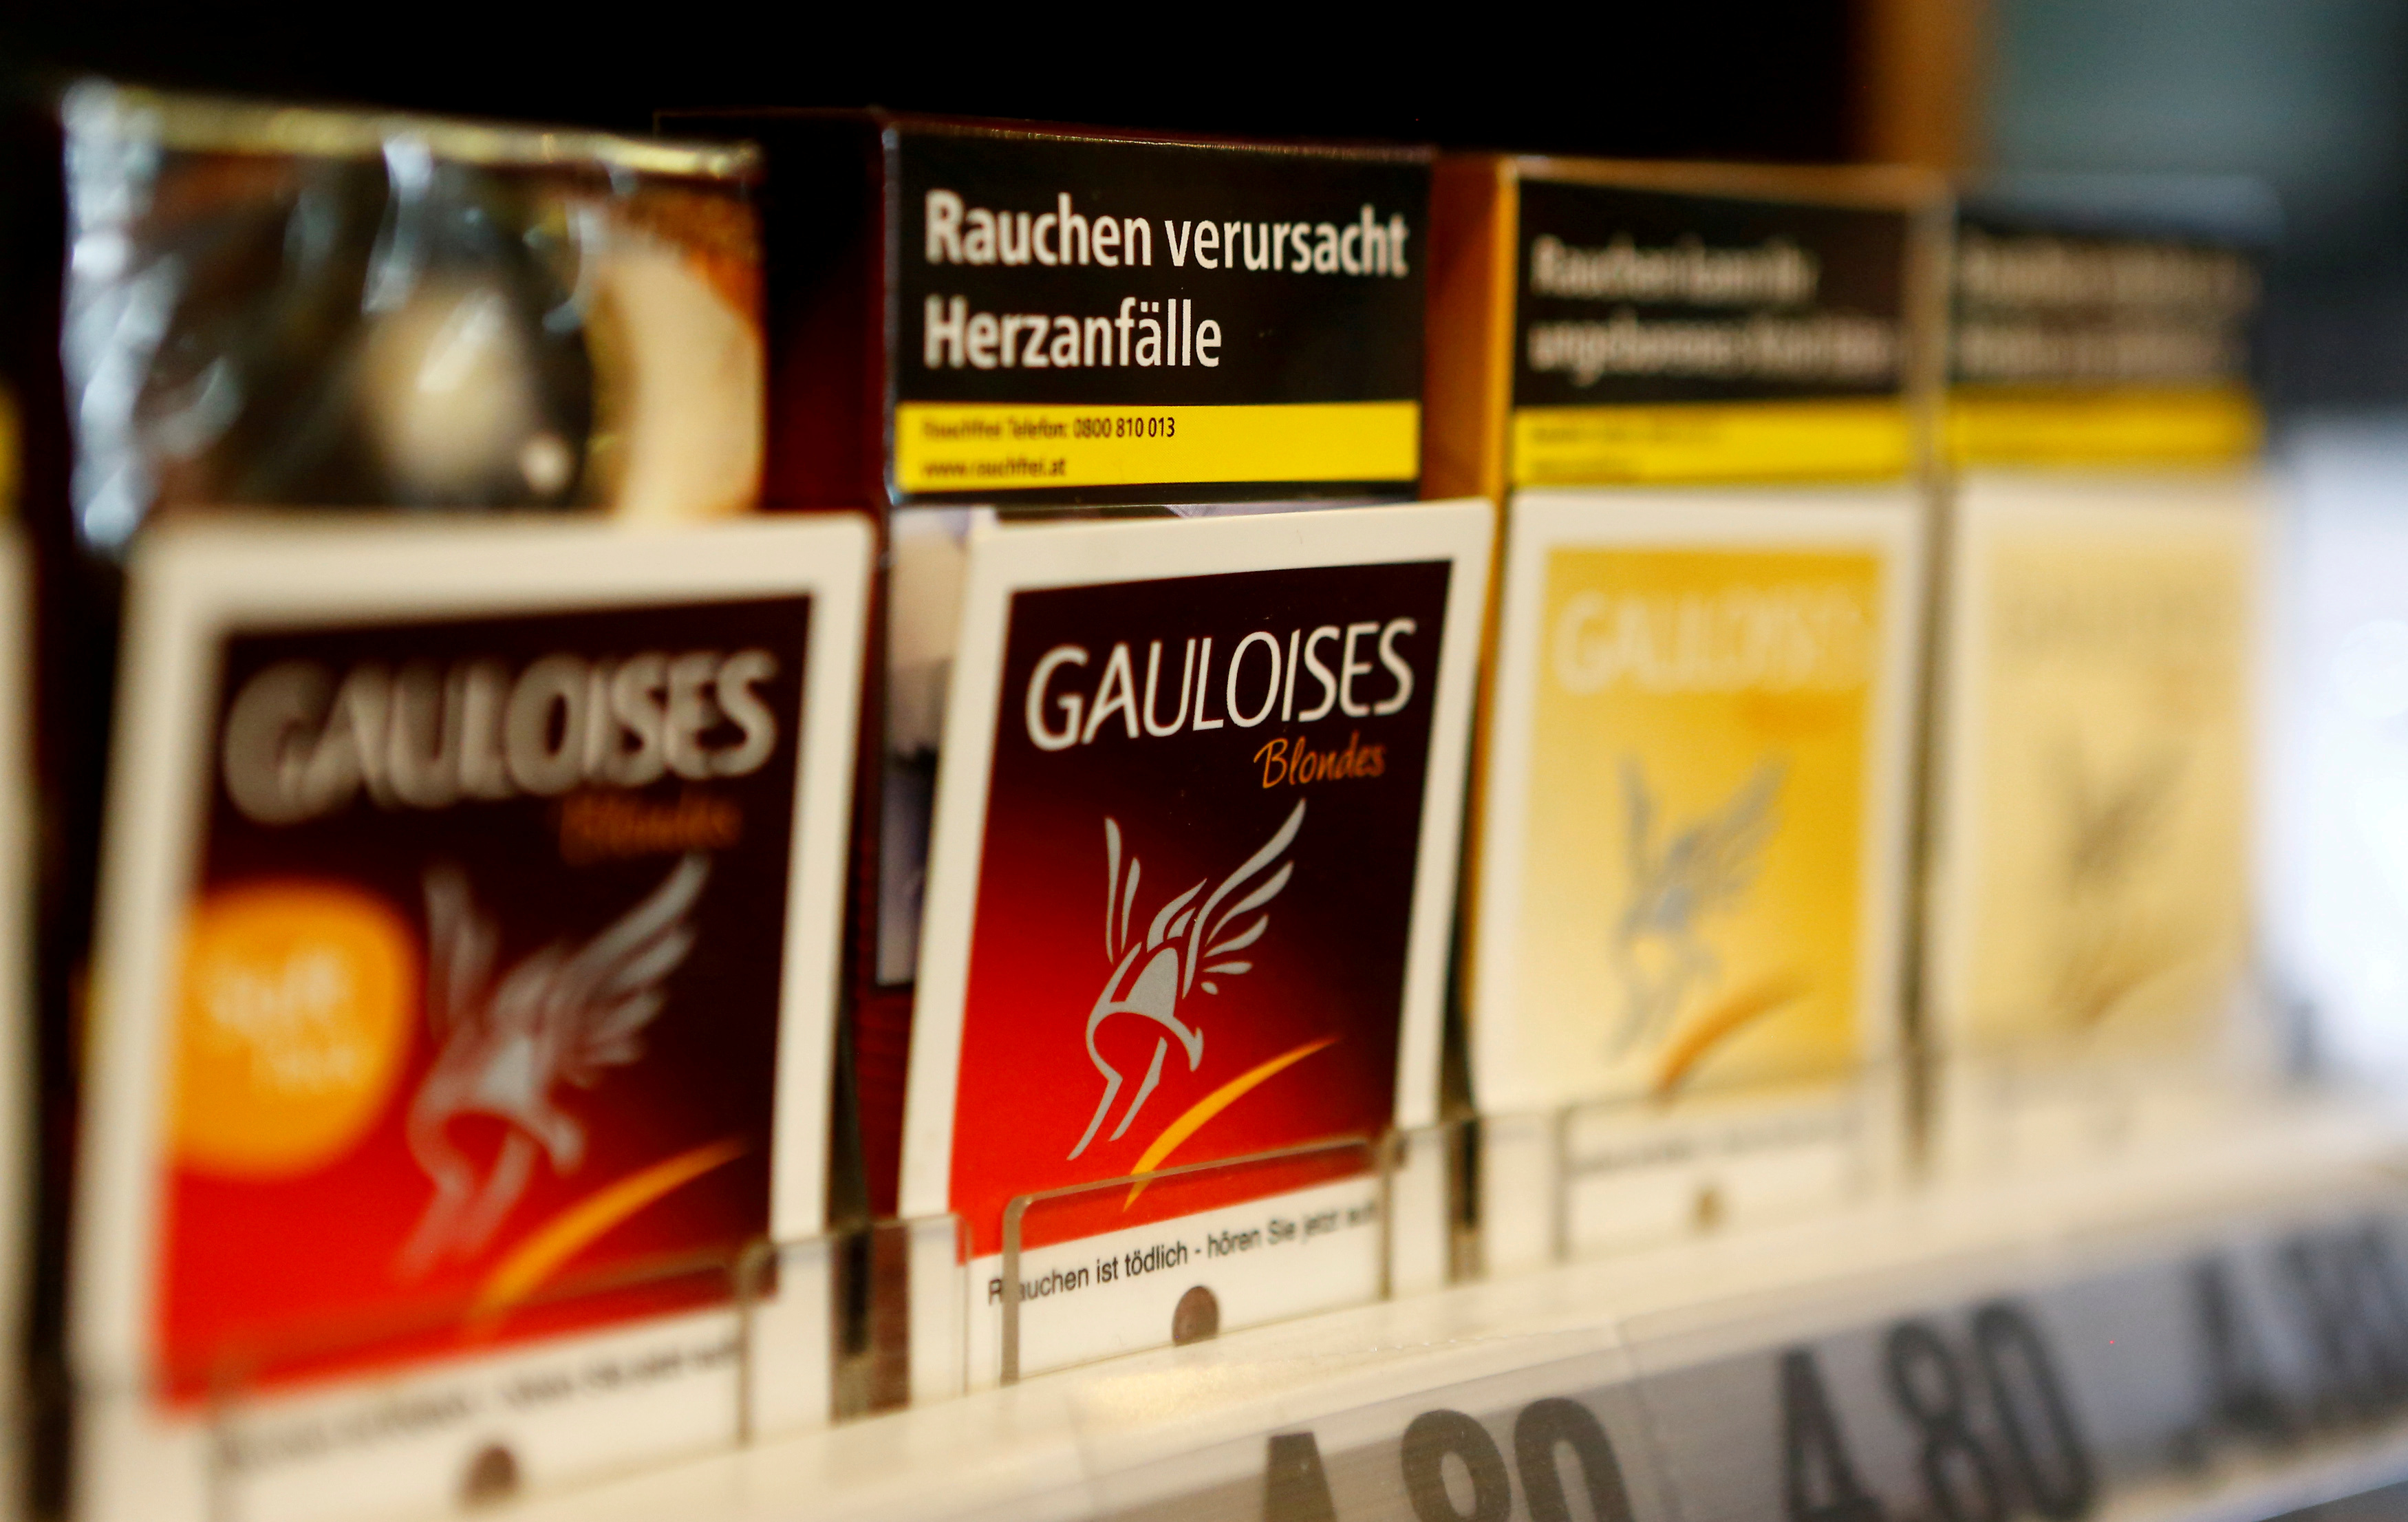 Packs of Gauloises cigarettes are on display in a tobacco shop in Vienna, Austria